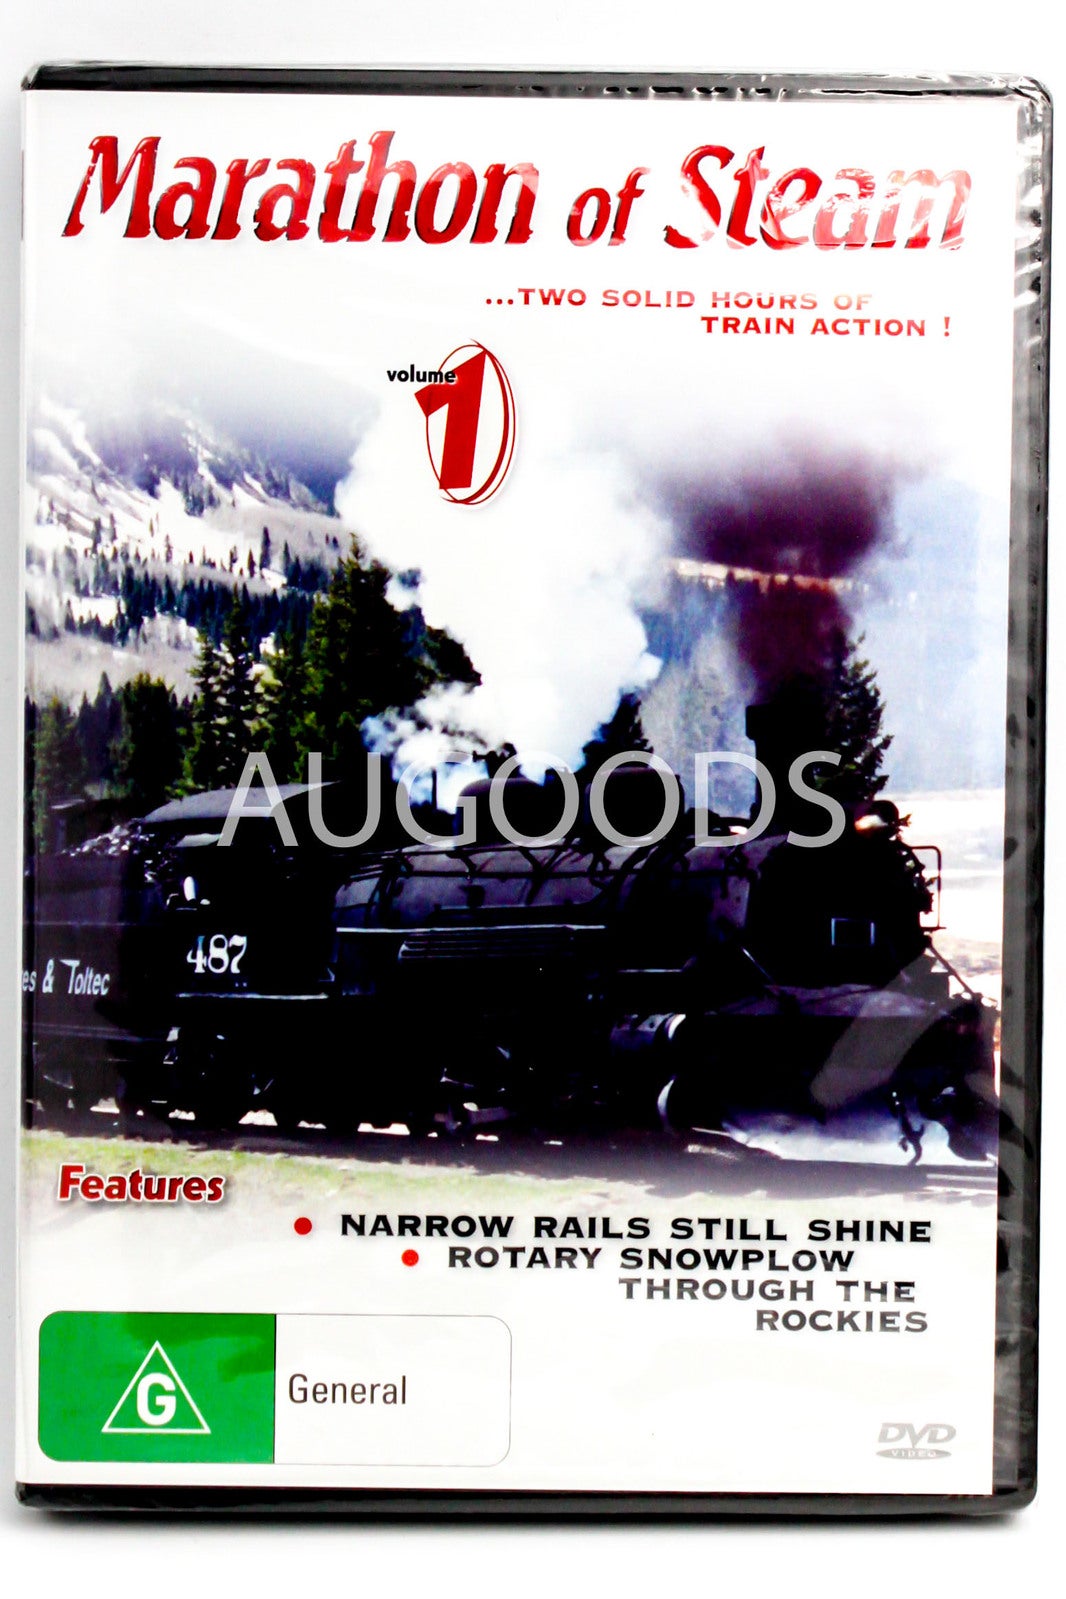 Marathon of Steam - 2 Hours of Solid Train Action DVD